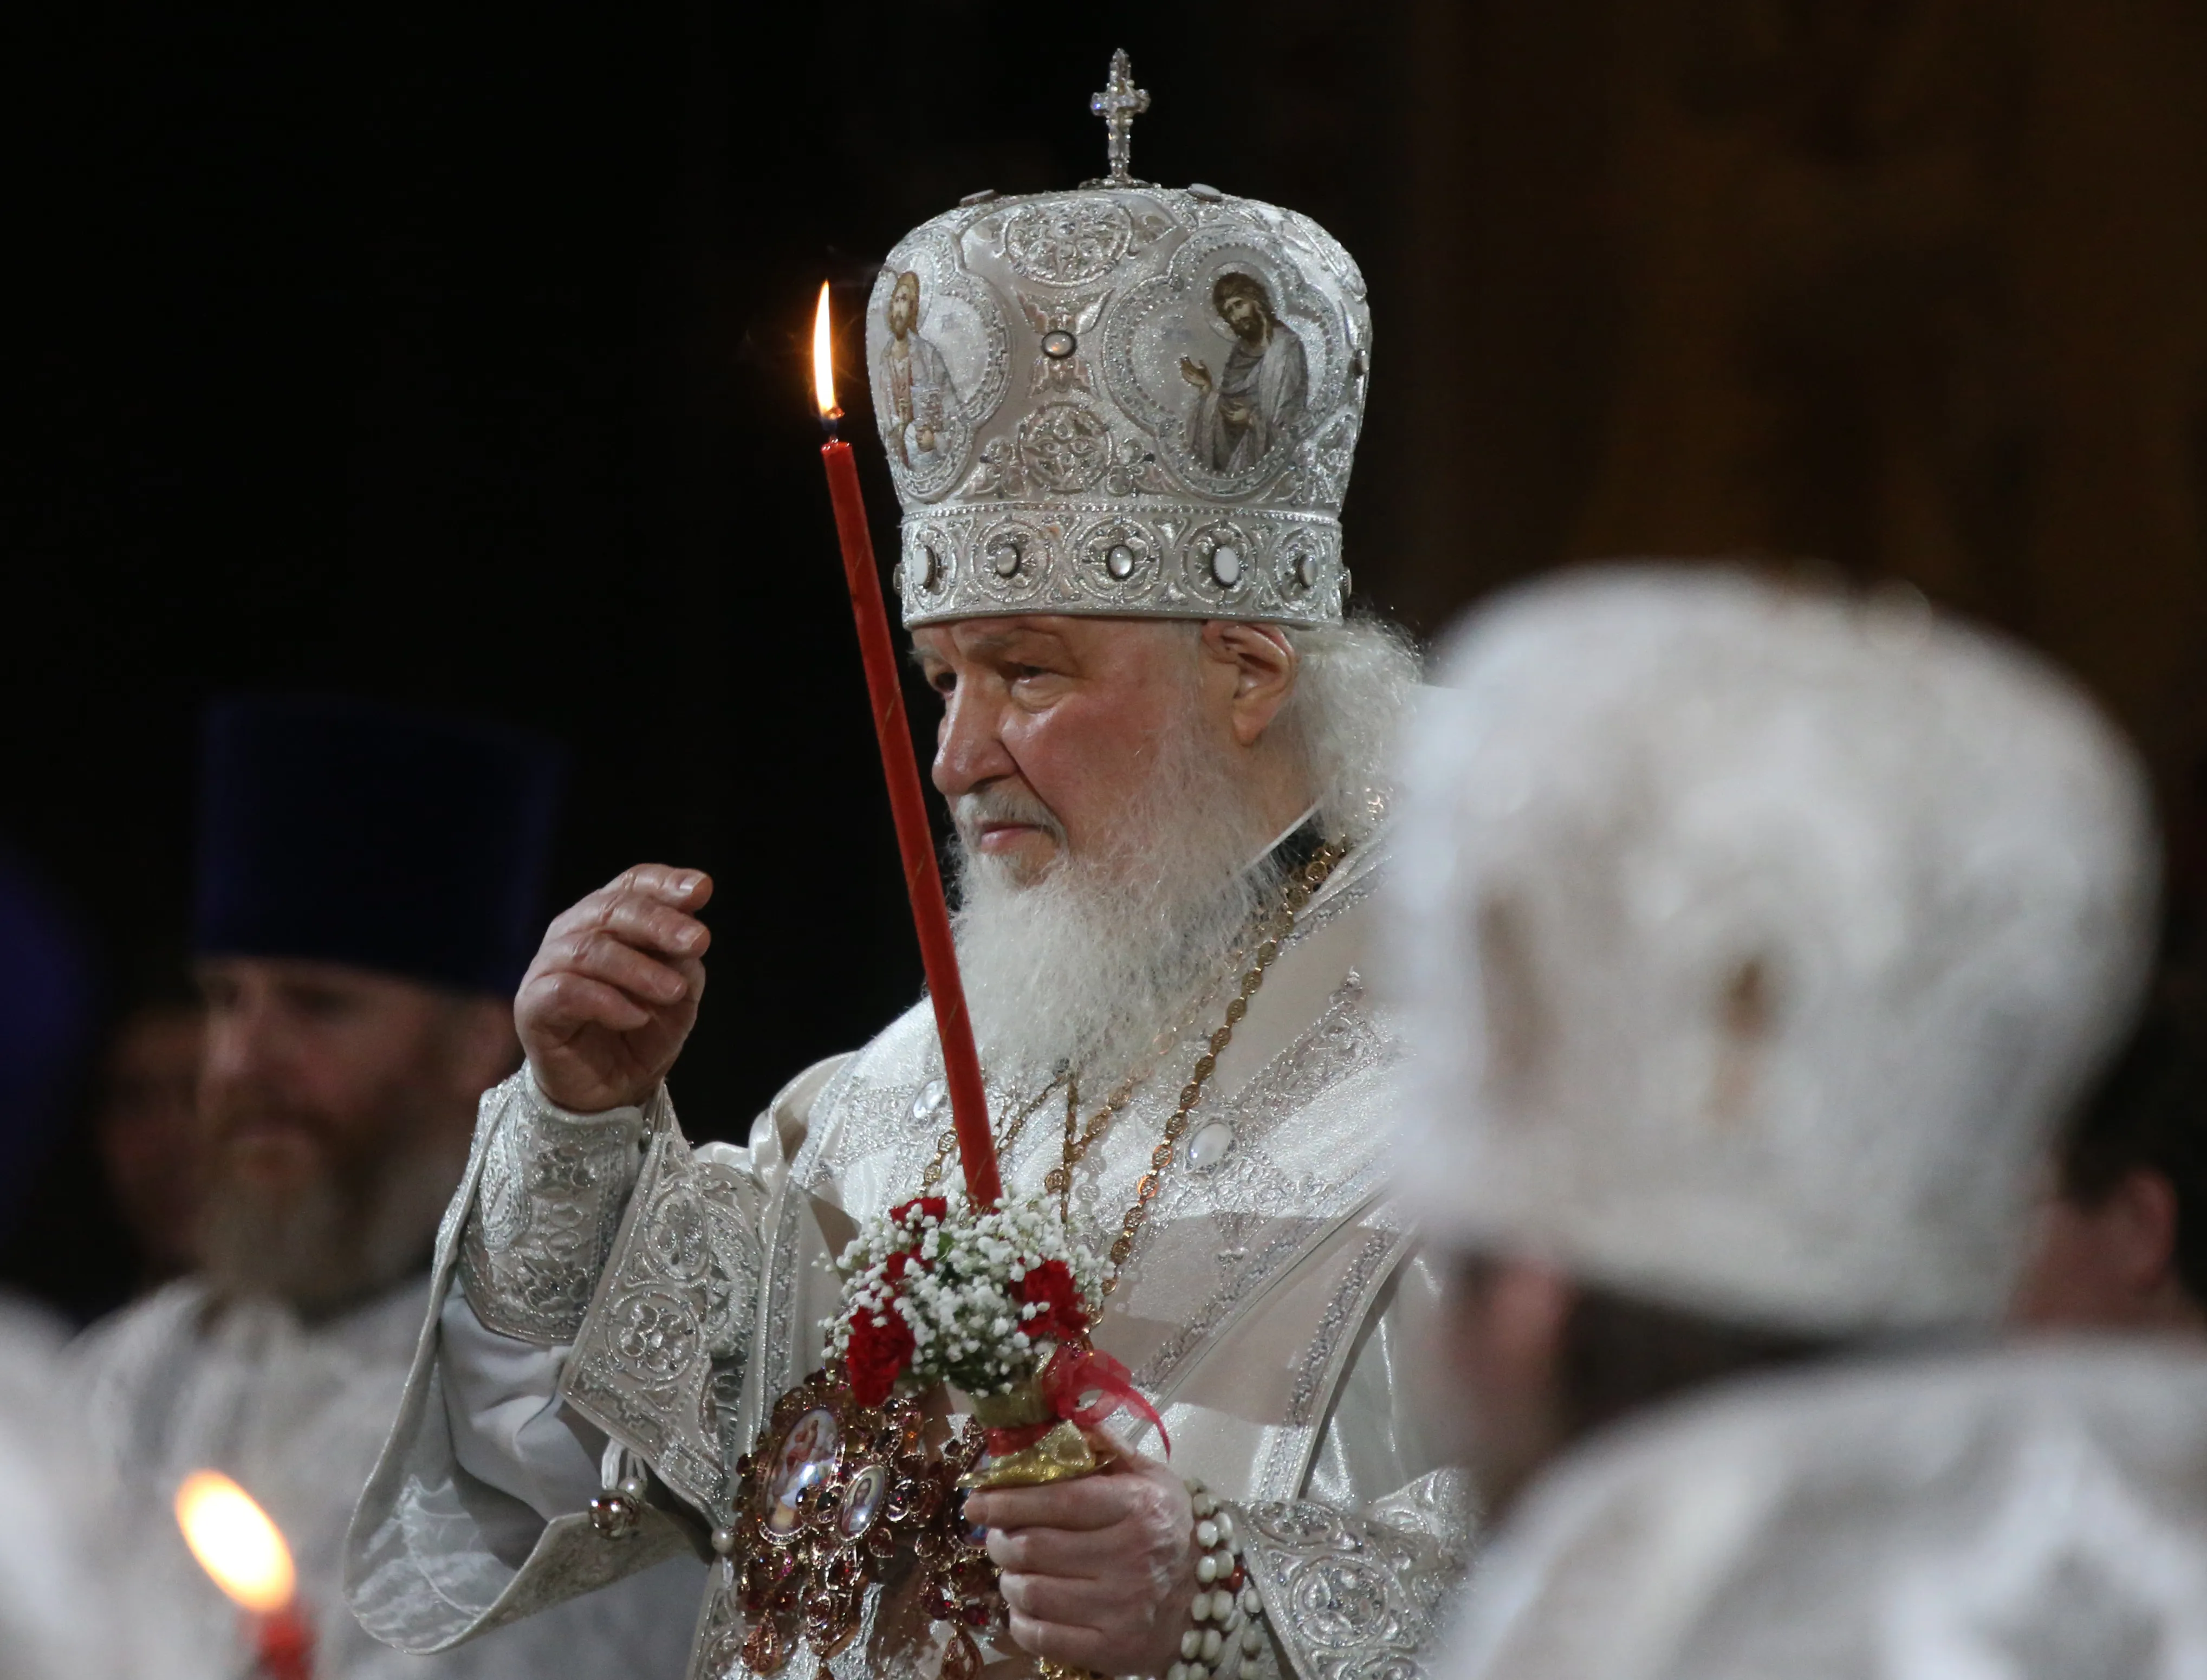 Russian Orthodox Patriarch Kirill makes the sign of the cross during the Easter Mass at the Christ The Saviour Cathedral on April 24, 2022 in Moscow, Russia.?w=200&h=150